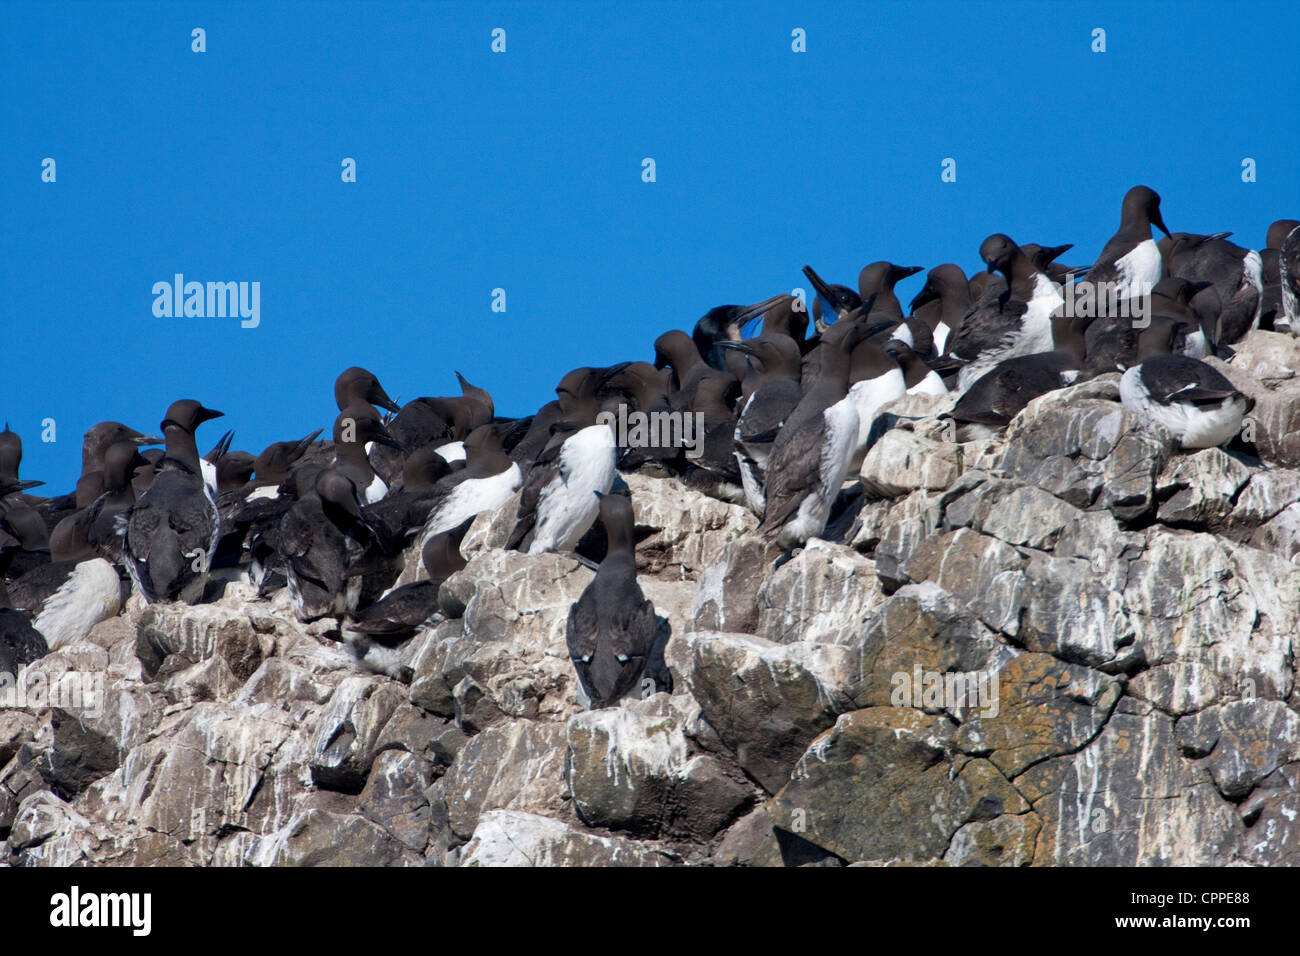 A colony of Common Murre (Uria aalge) gathering in large numbers on rocks offshore from Yaquina Head, Newport, Oregon in July Stock Photo